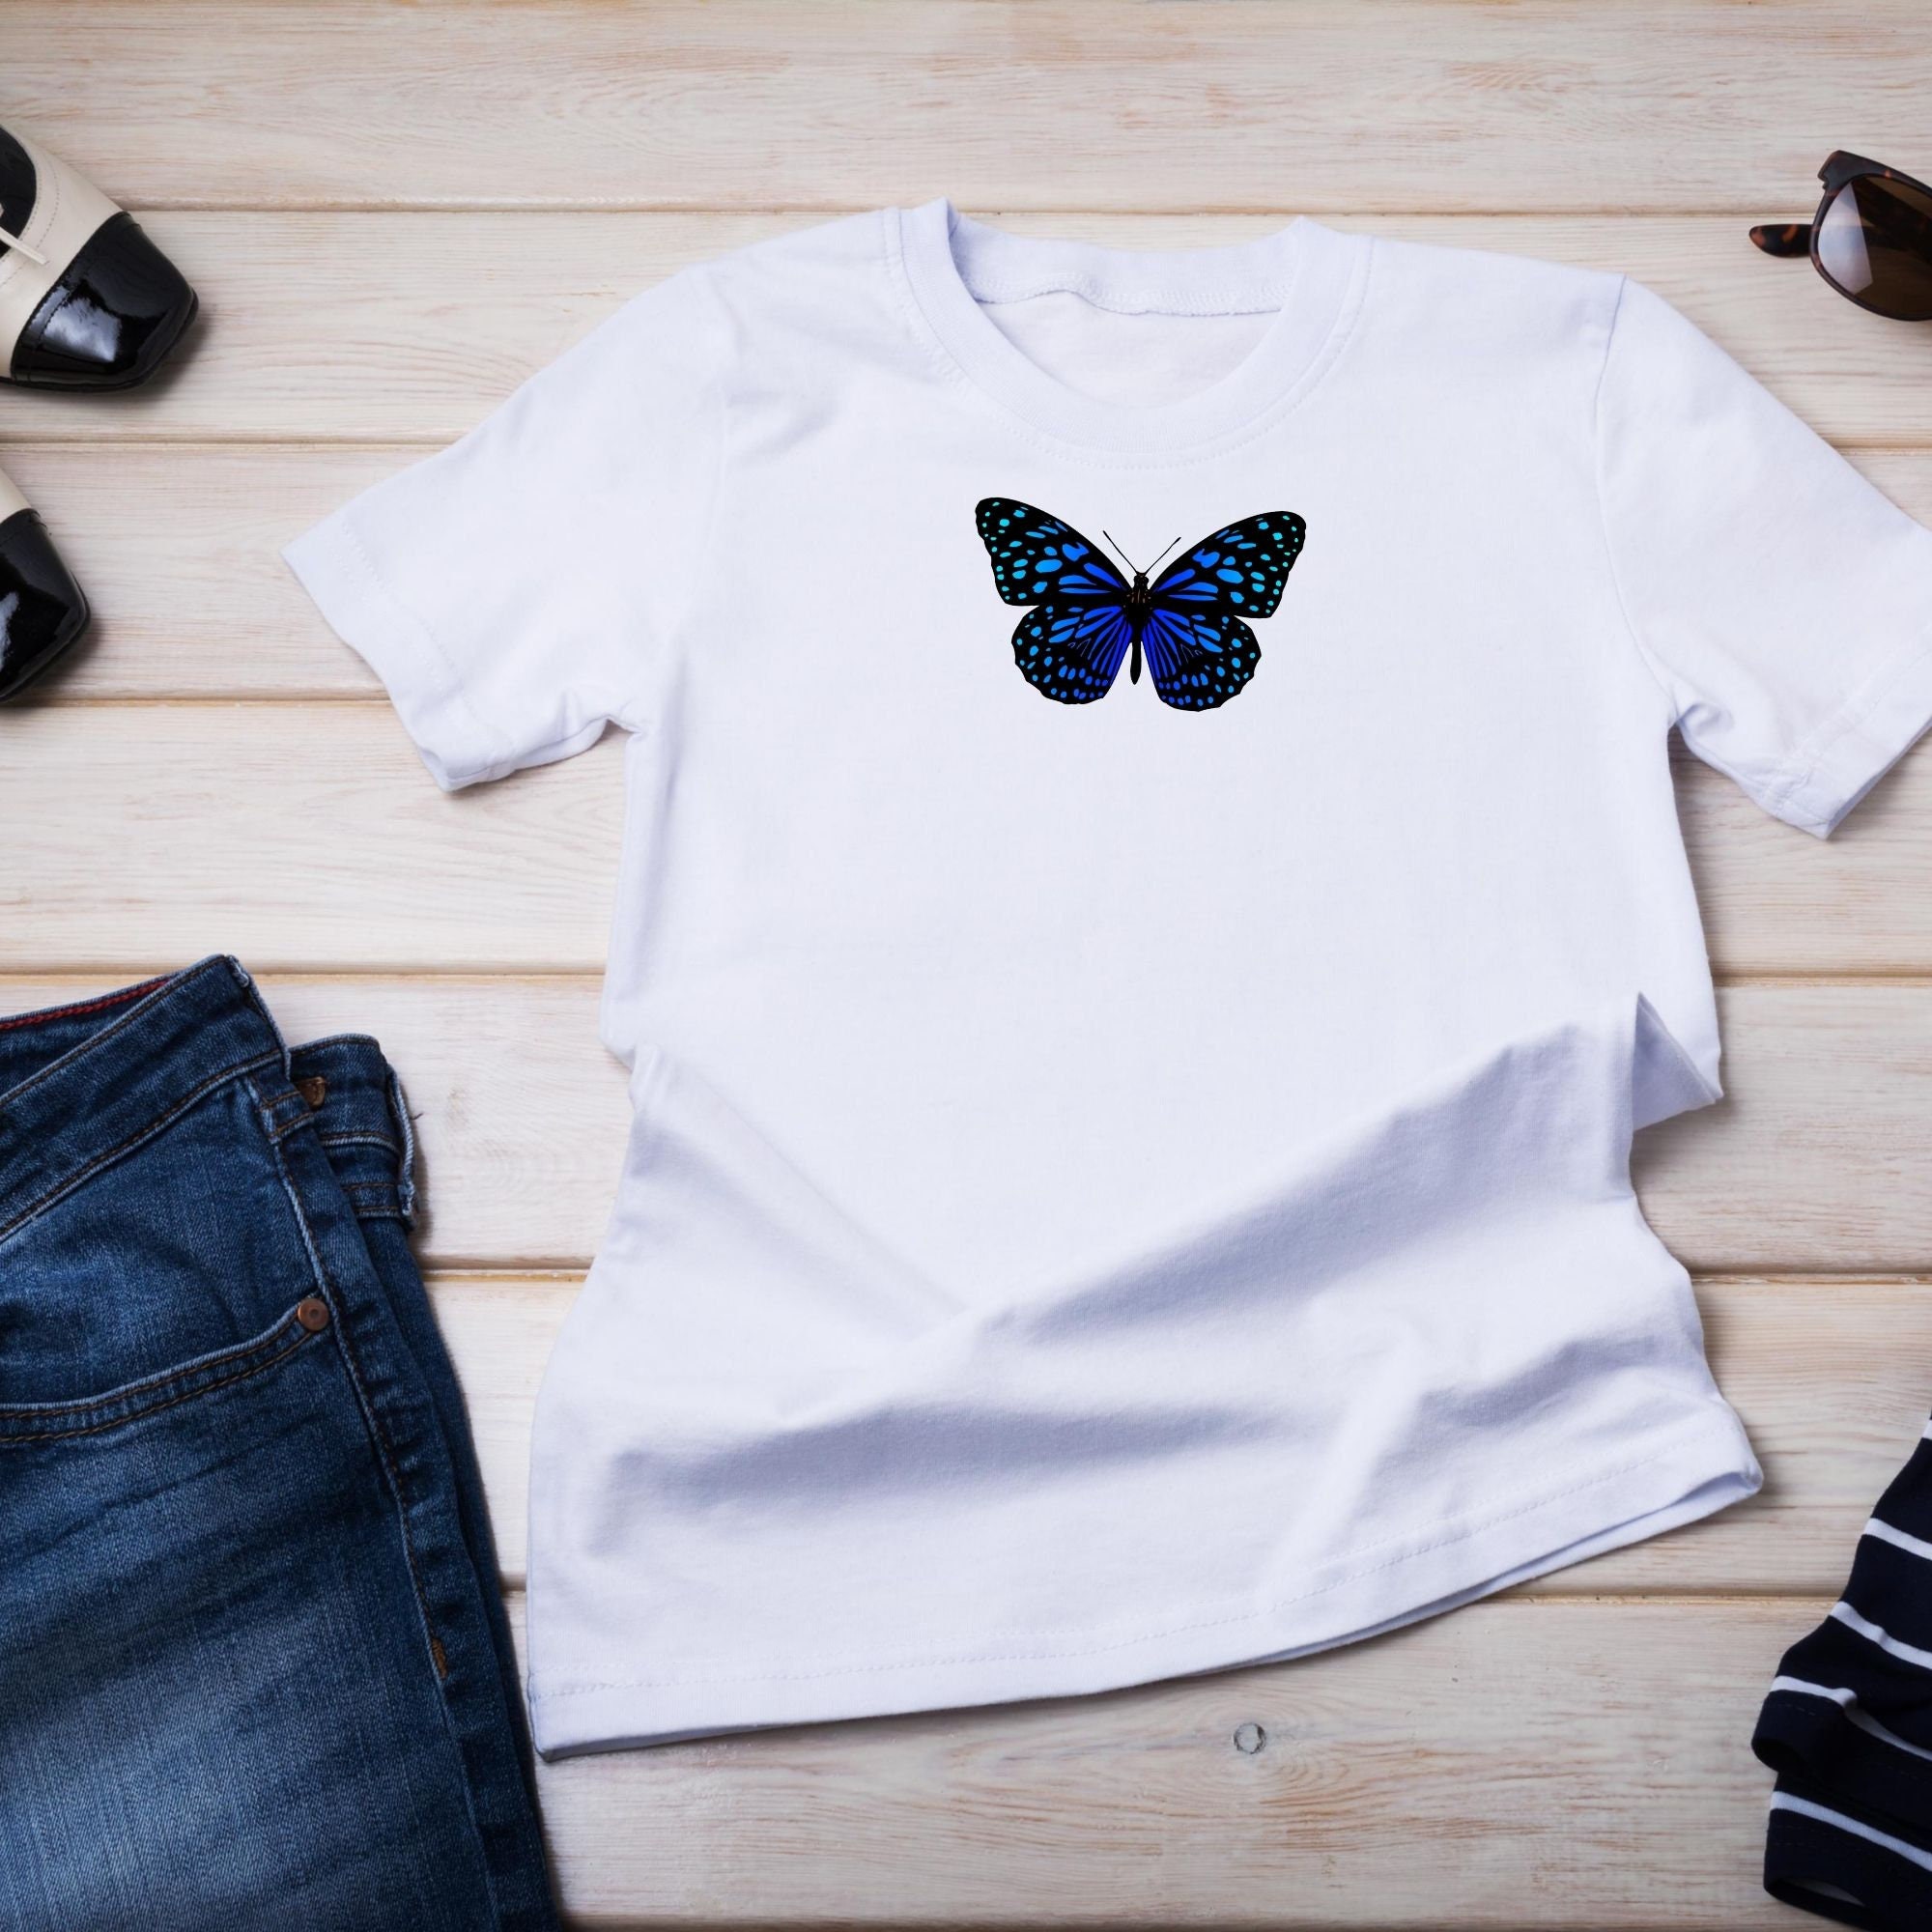 Butterfly Shirt Monarch Butterfly T Shirt Aesthetic Clothing | Etsy